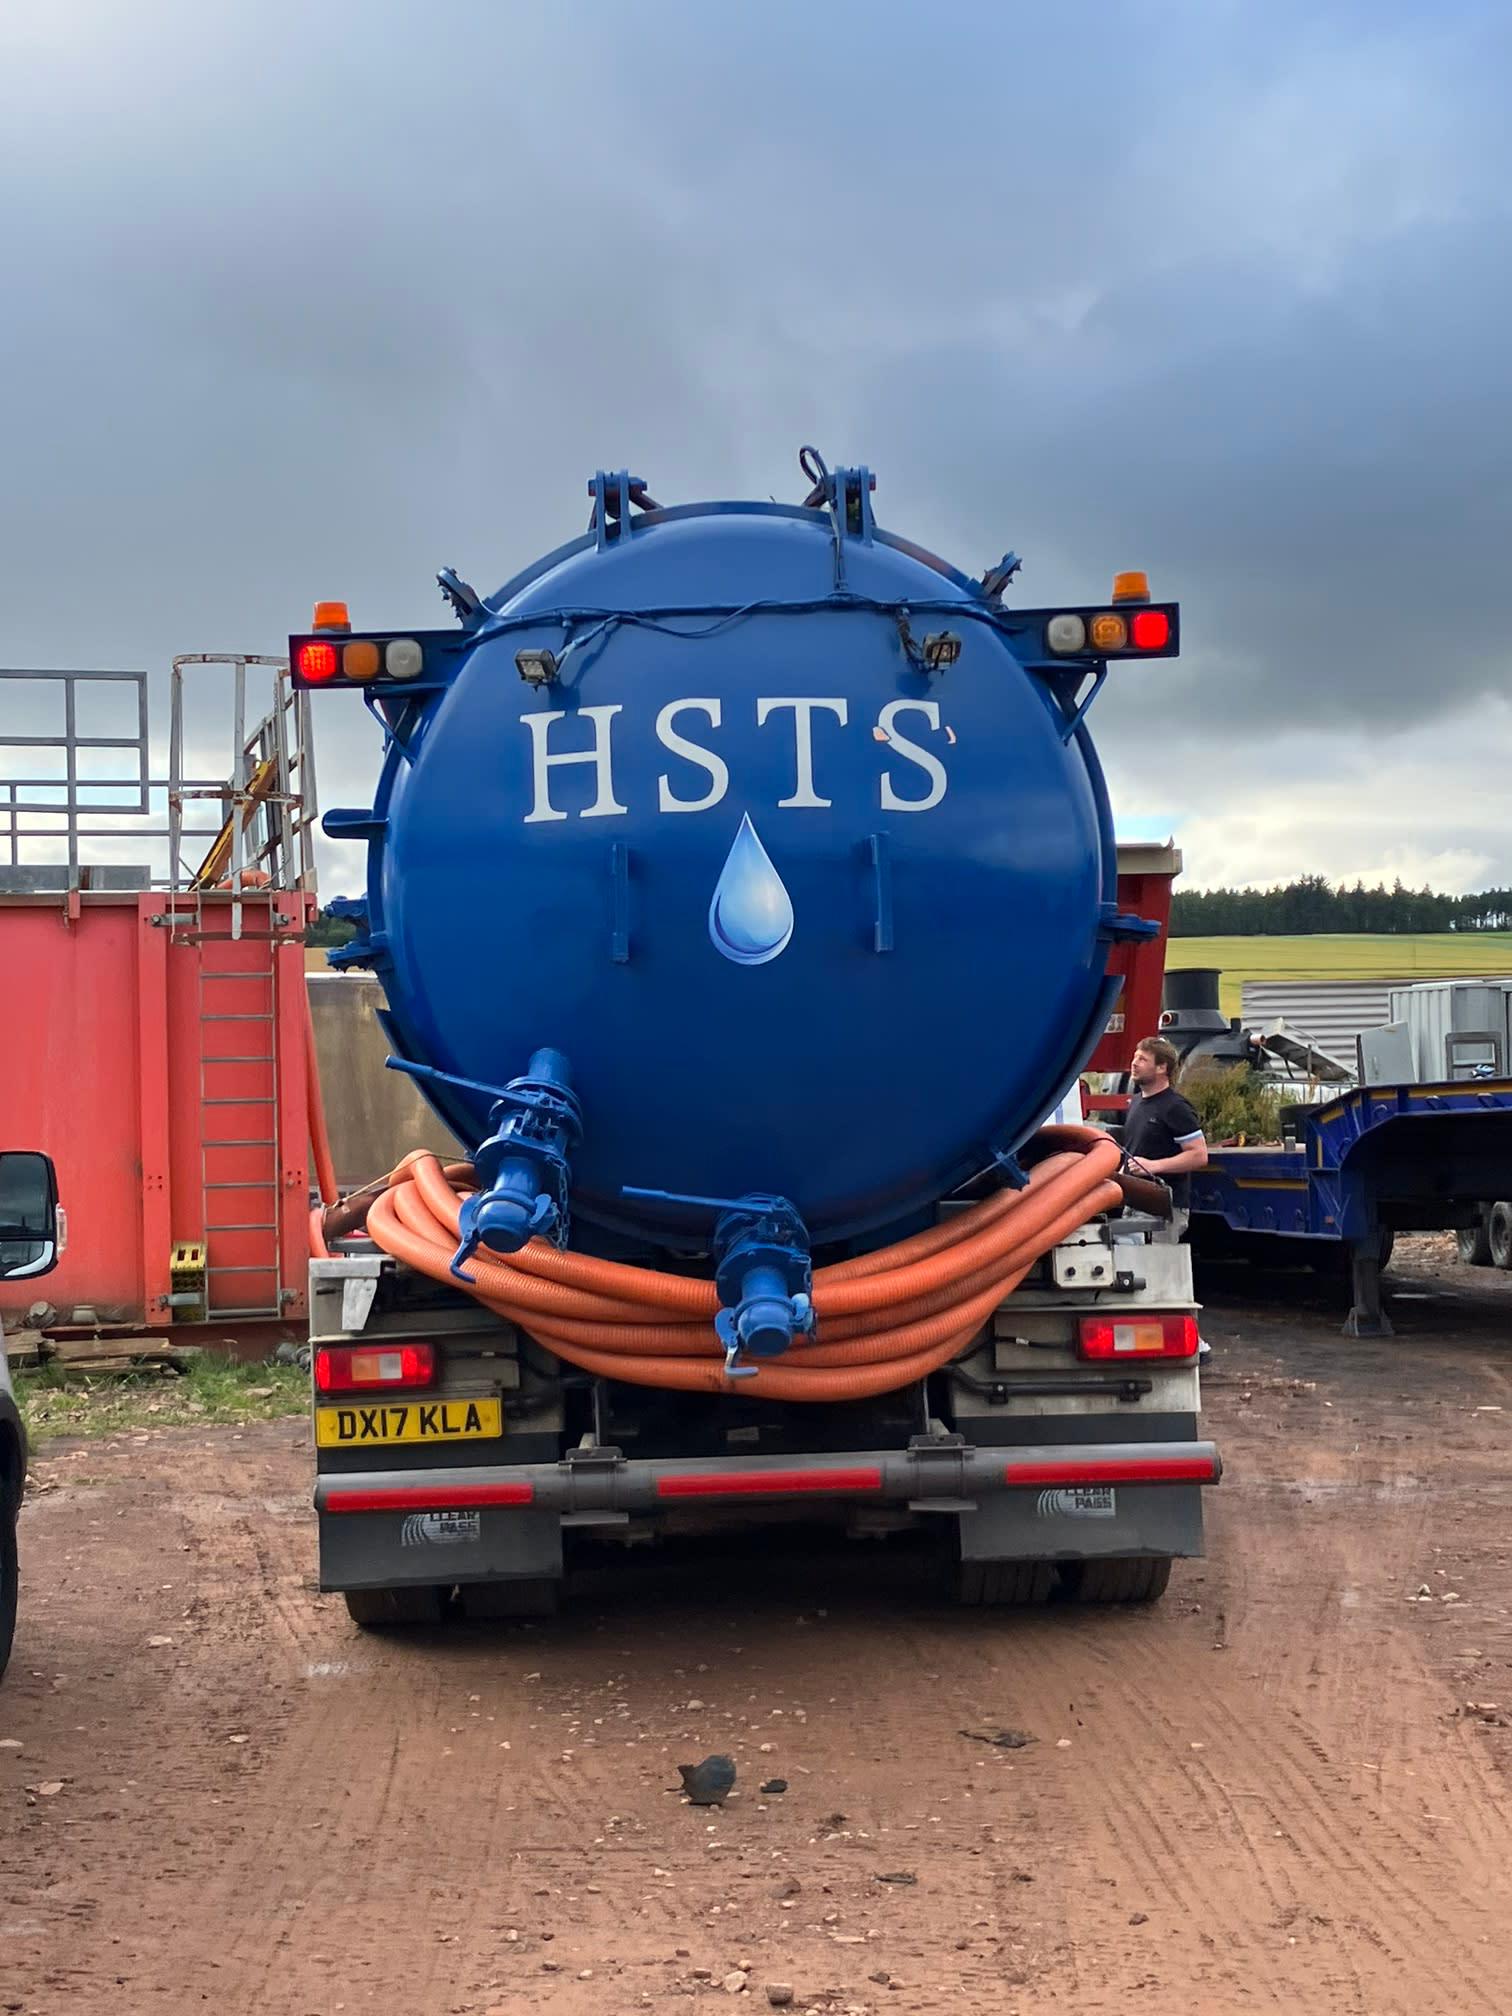 Images Highland Septic Tank Services